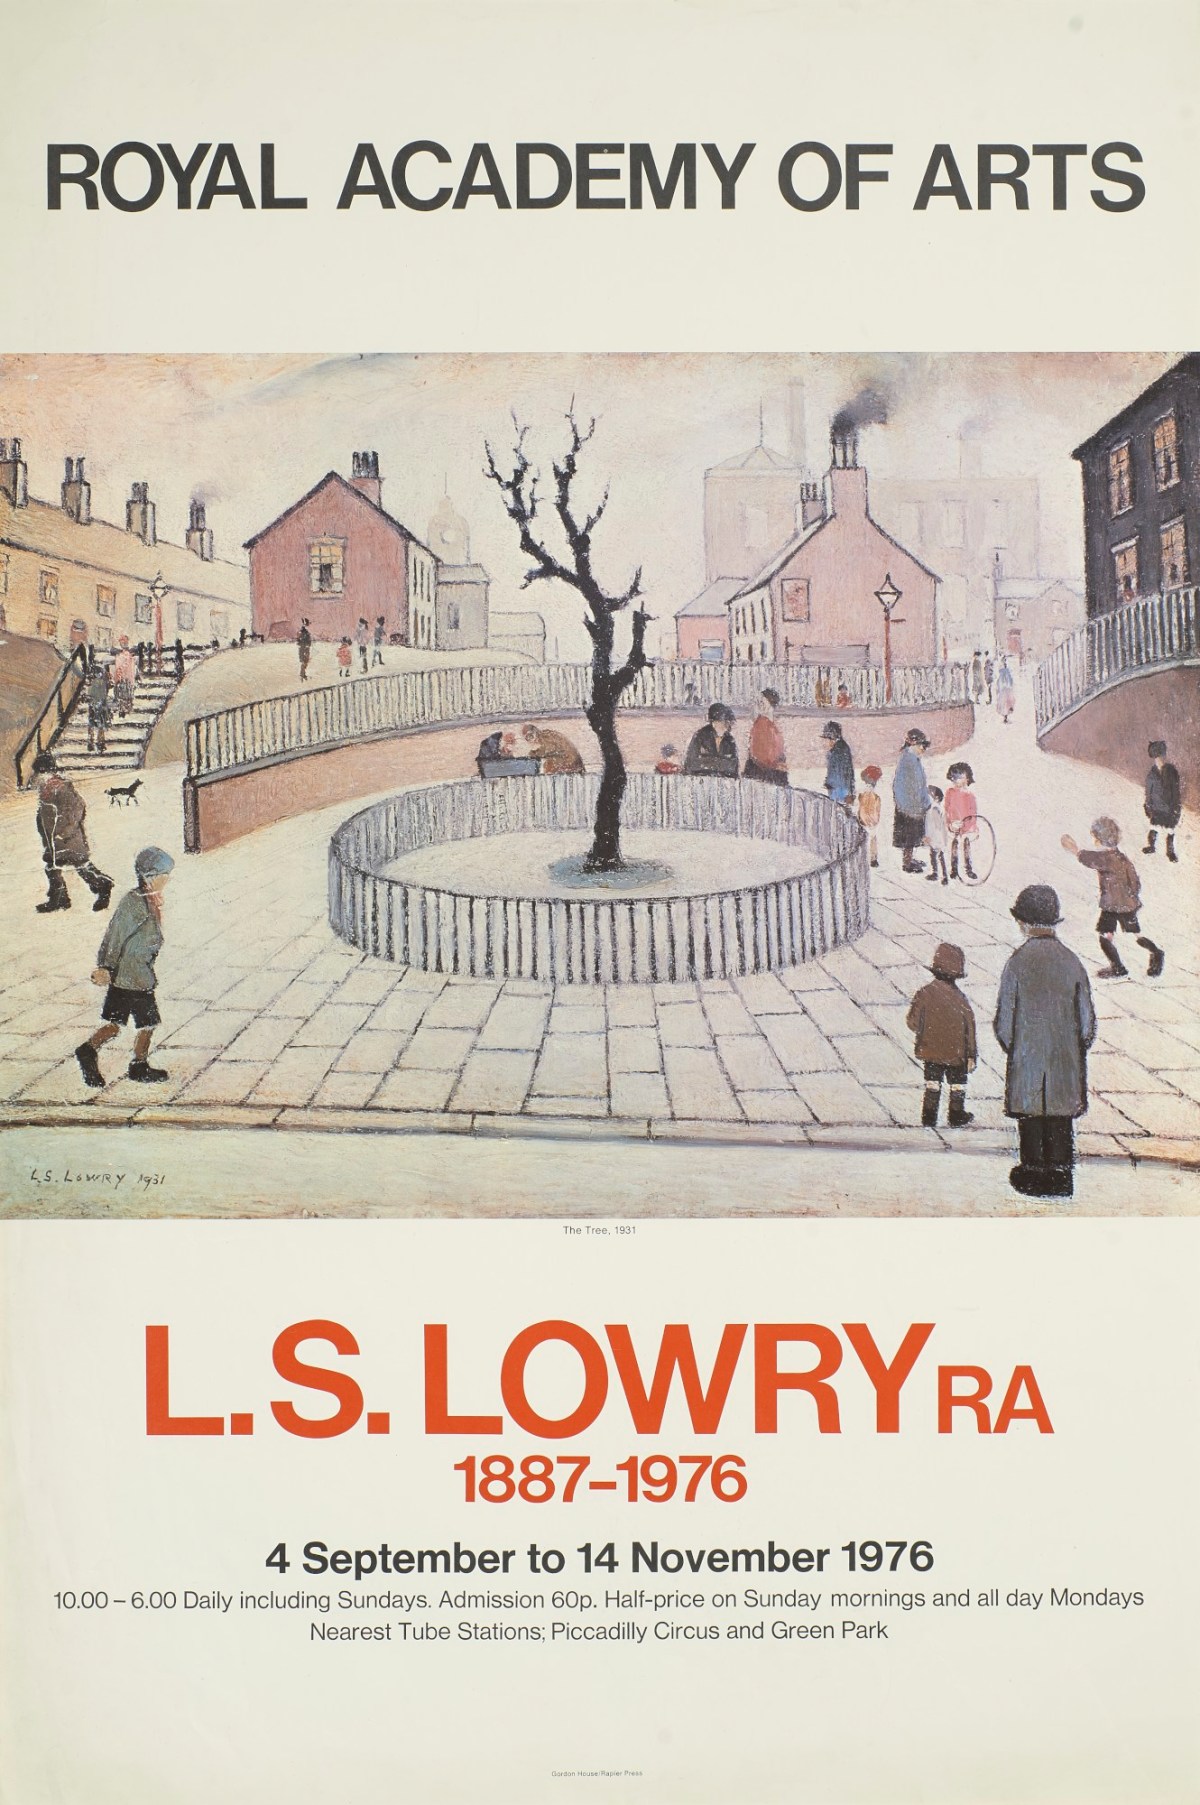 L.S. Lowry, R.A. 1887-1976 | Archives | RA Collection | Royal